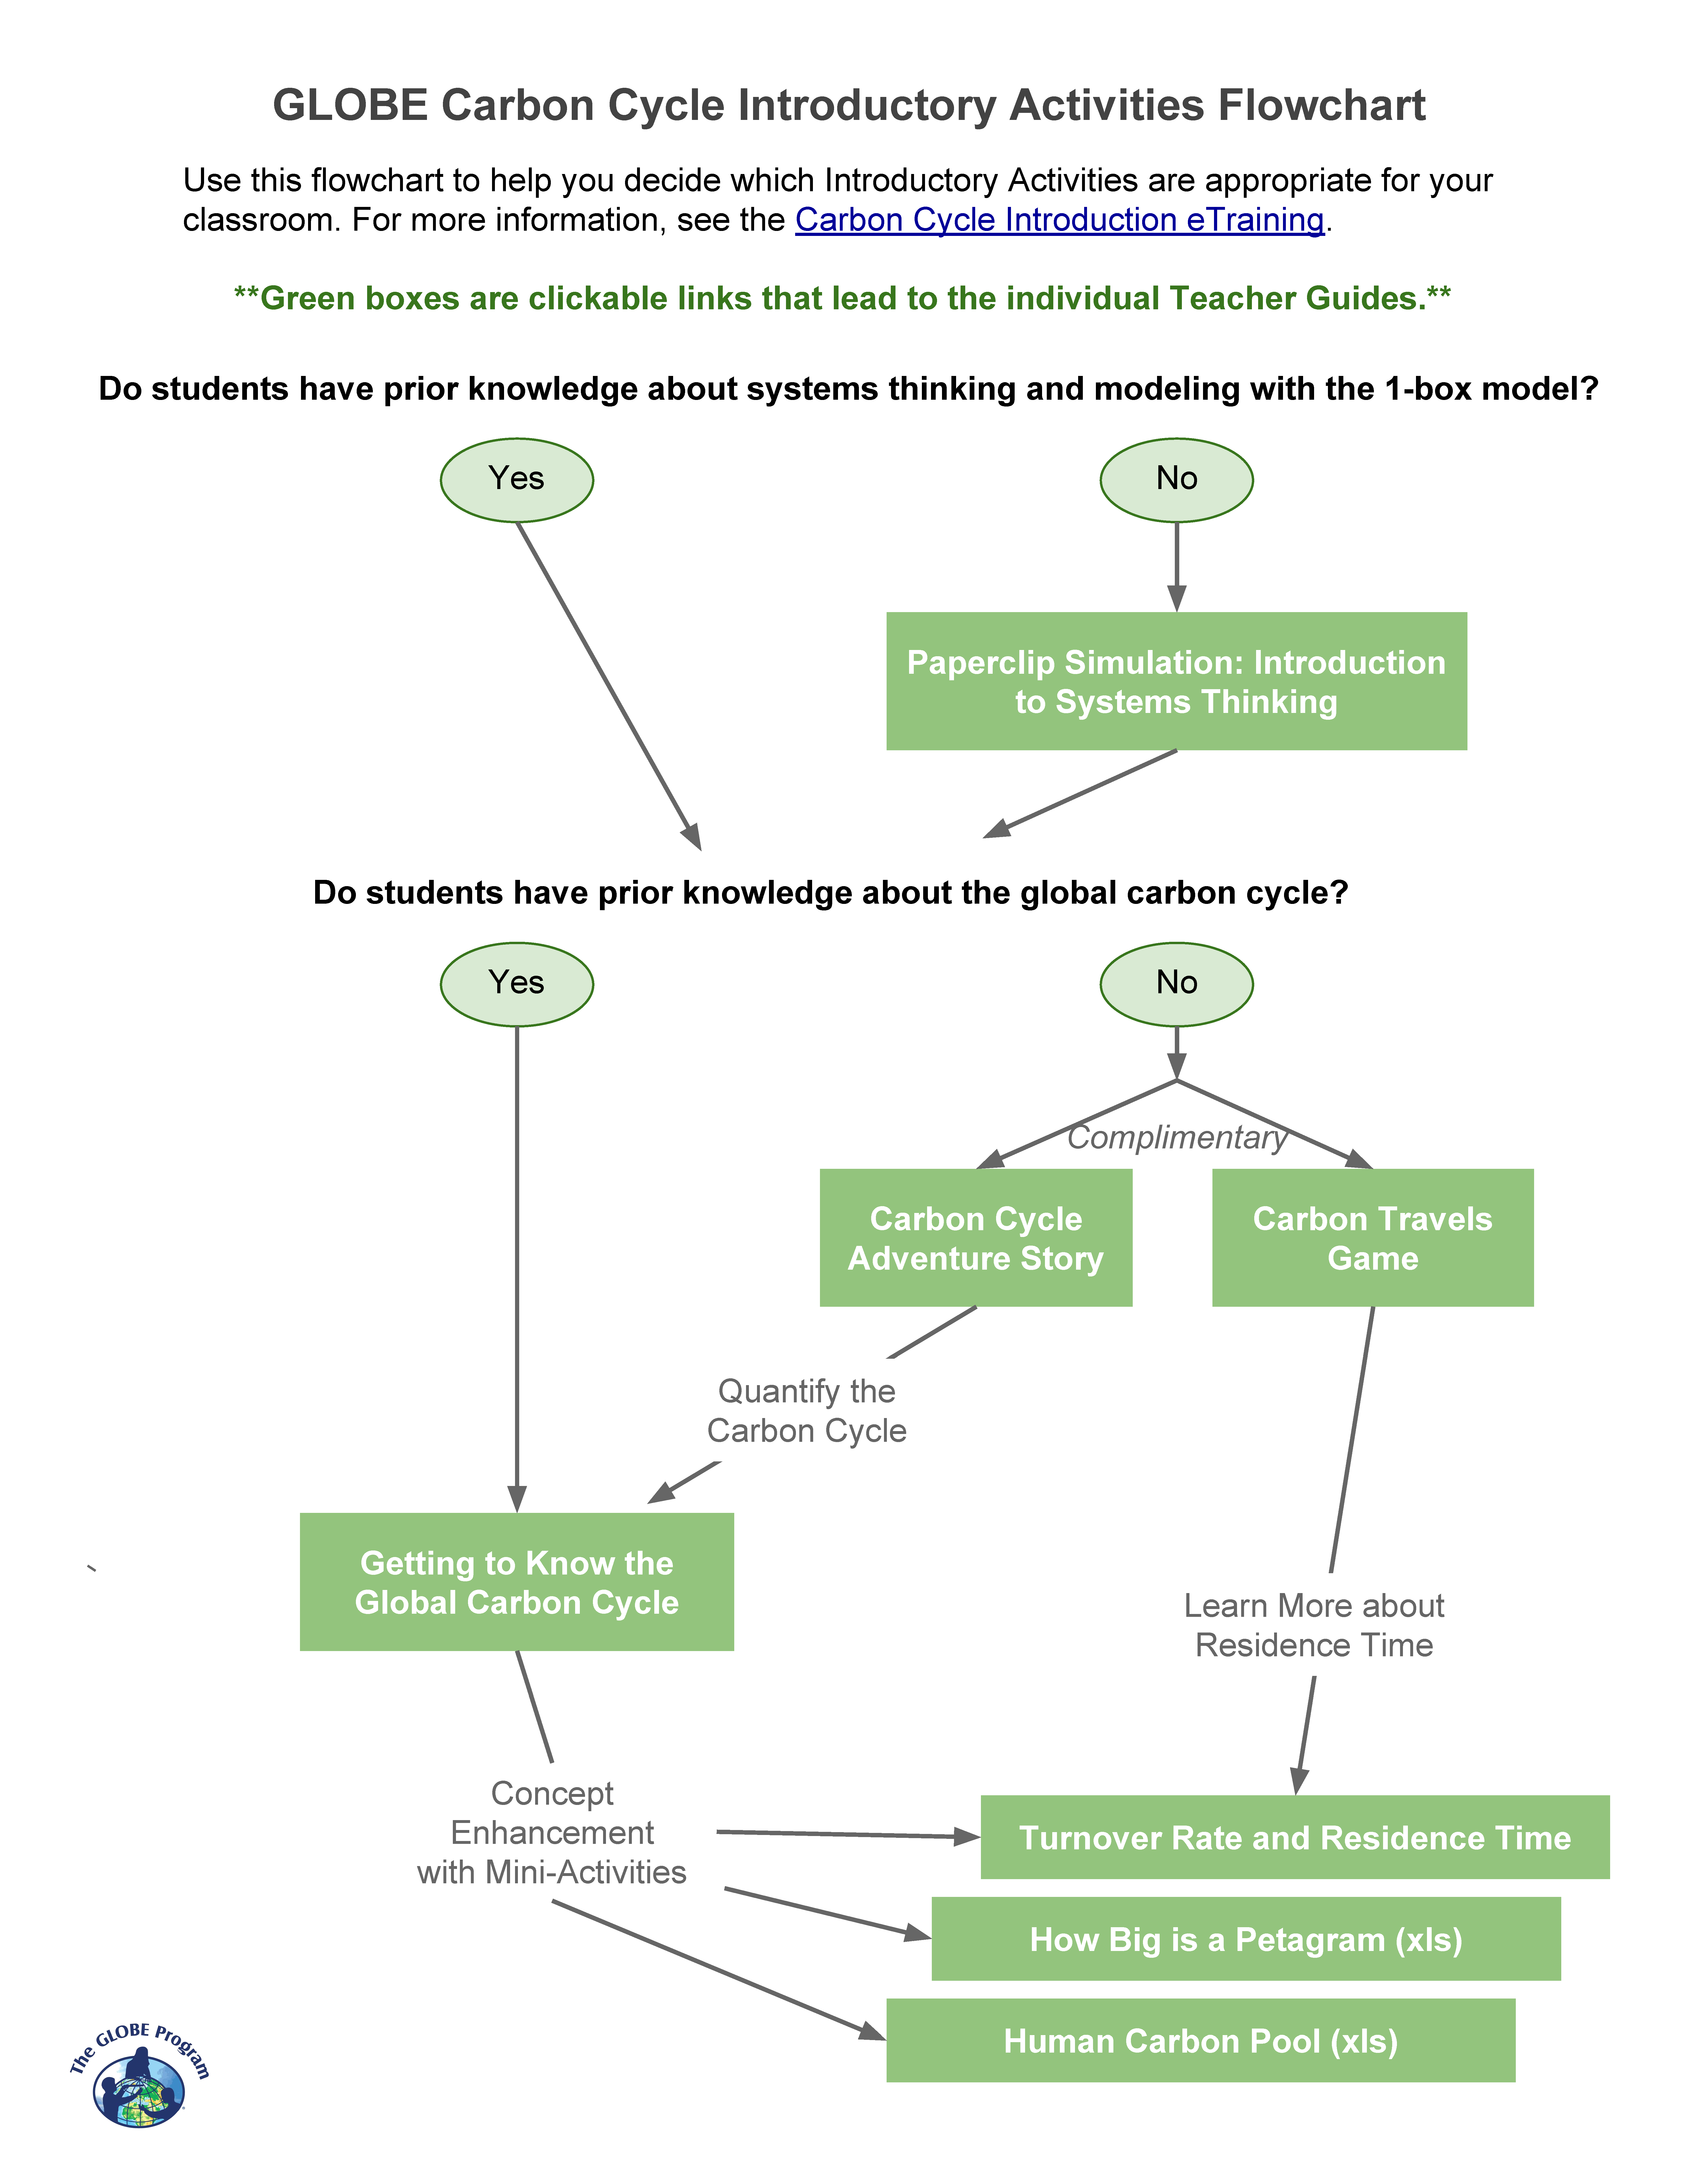 GLOBE Carbon Cycle Introductory Activities Flowchart